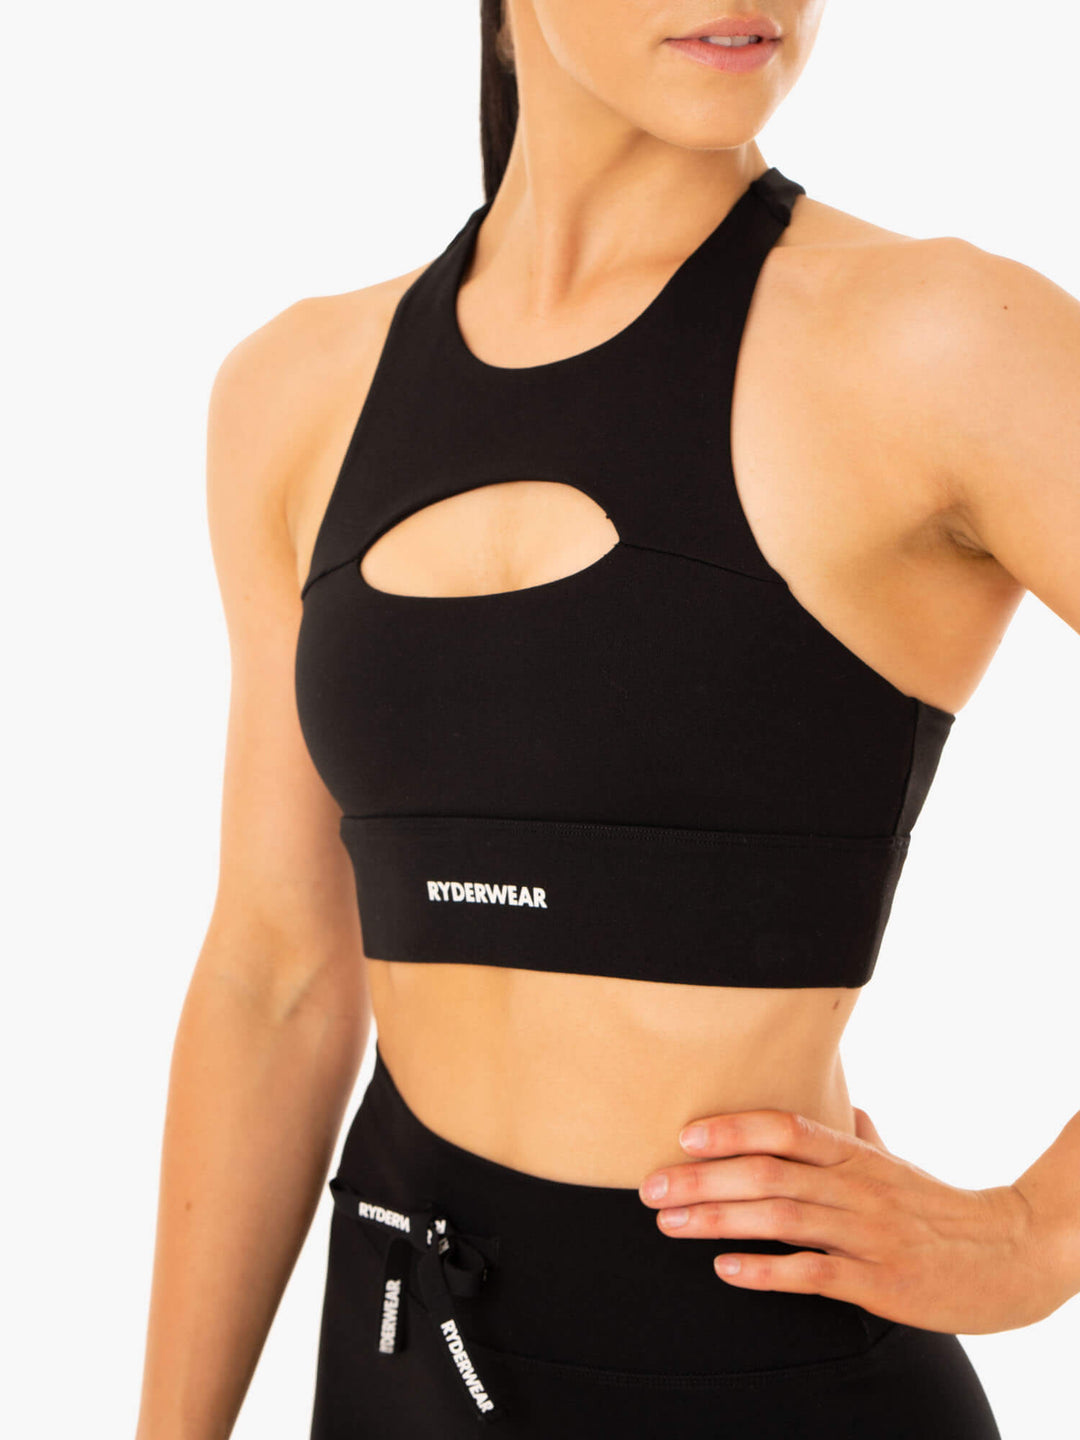 Replay Cut Out Sports Bra - Black Clothing Ryderwear 